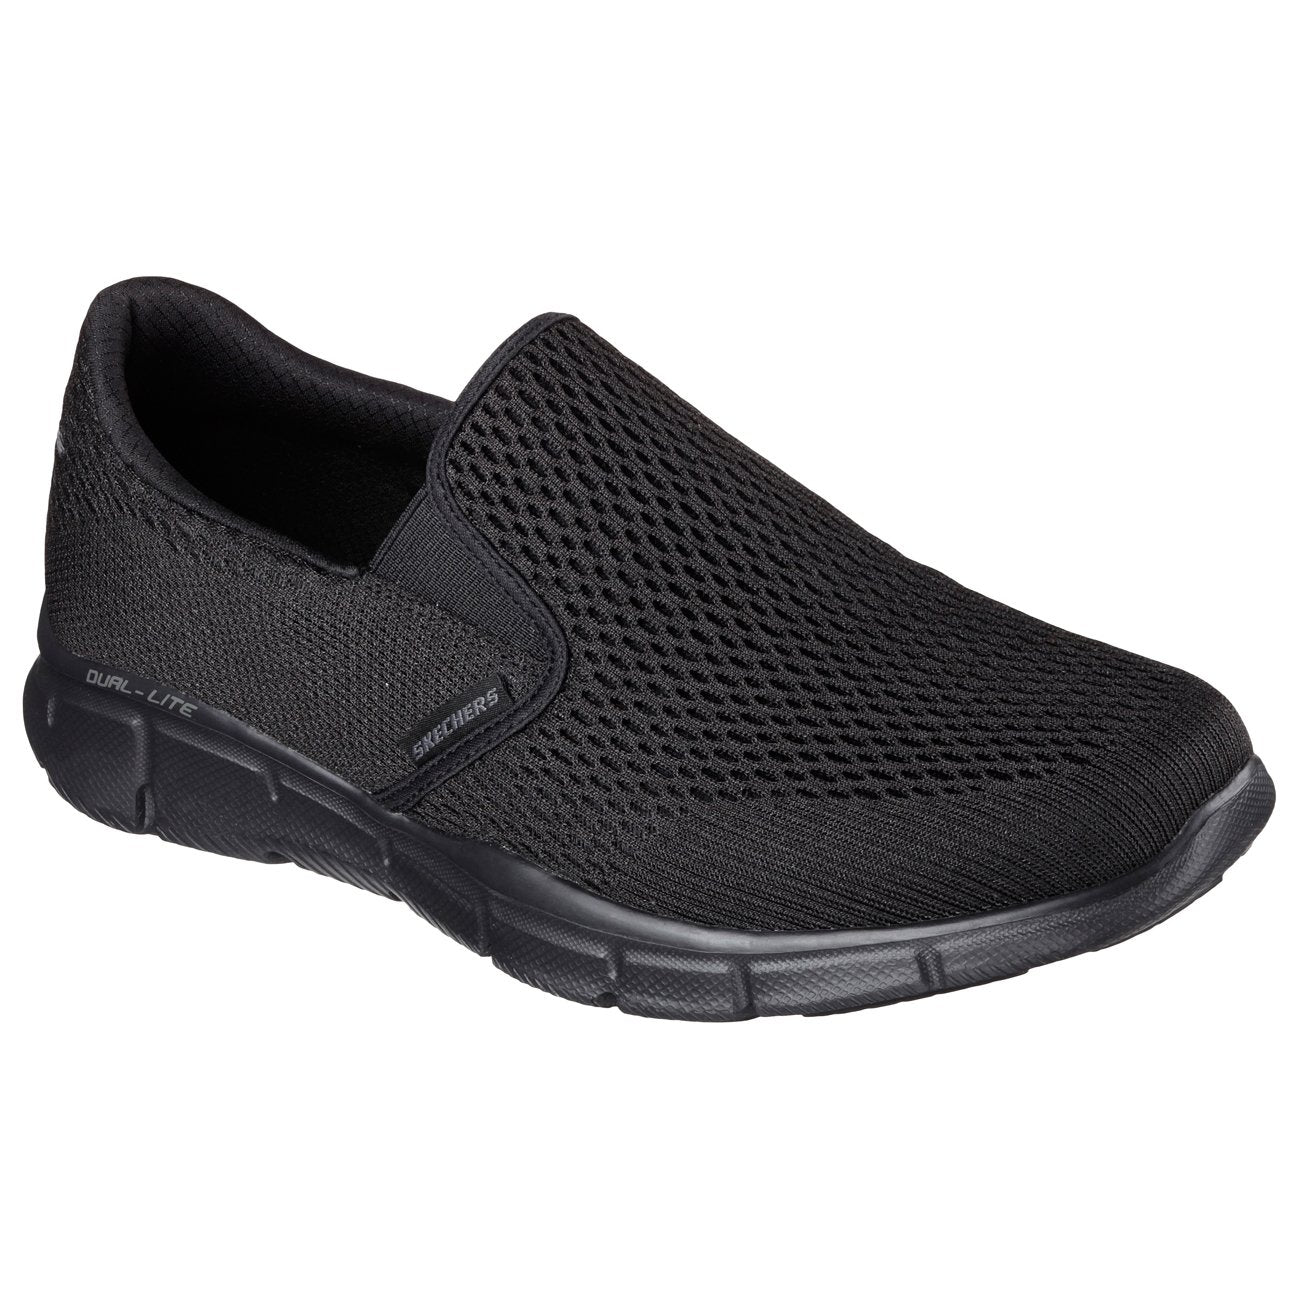 Skechers Equalizer Double Play Mens Walking Shoes – Sweatband